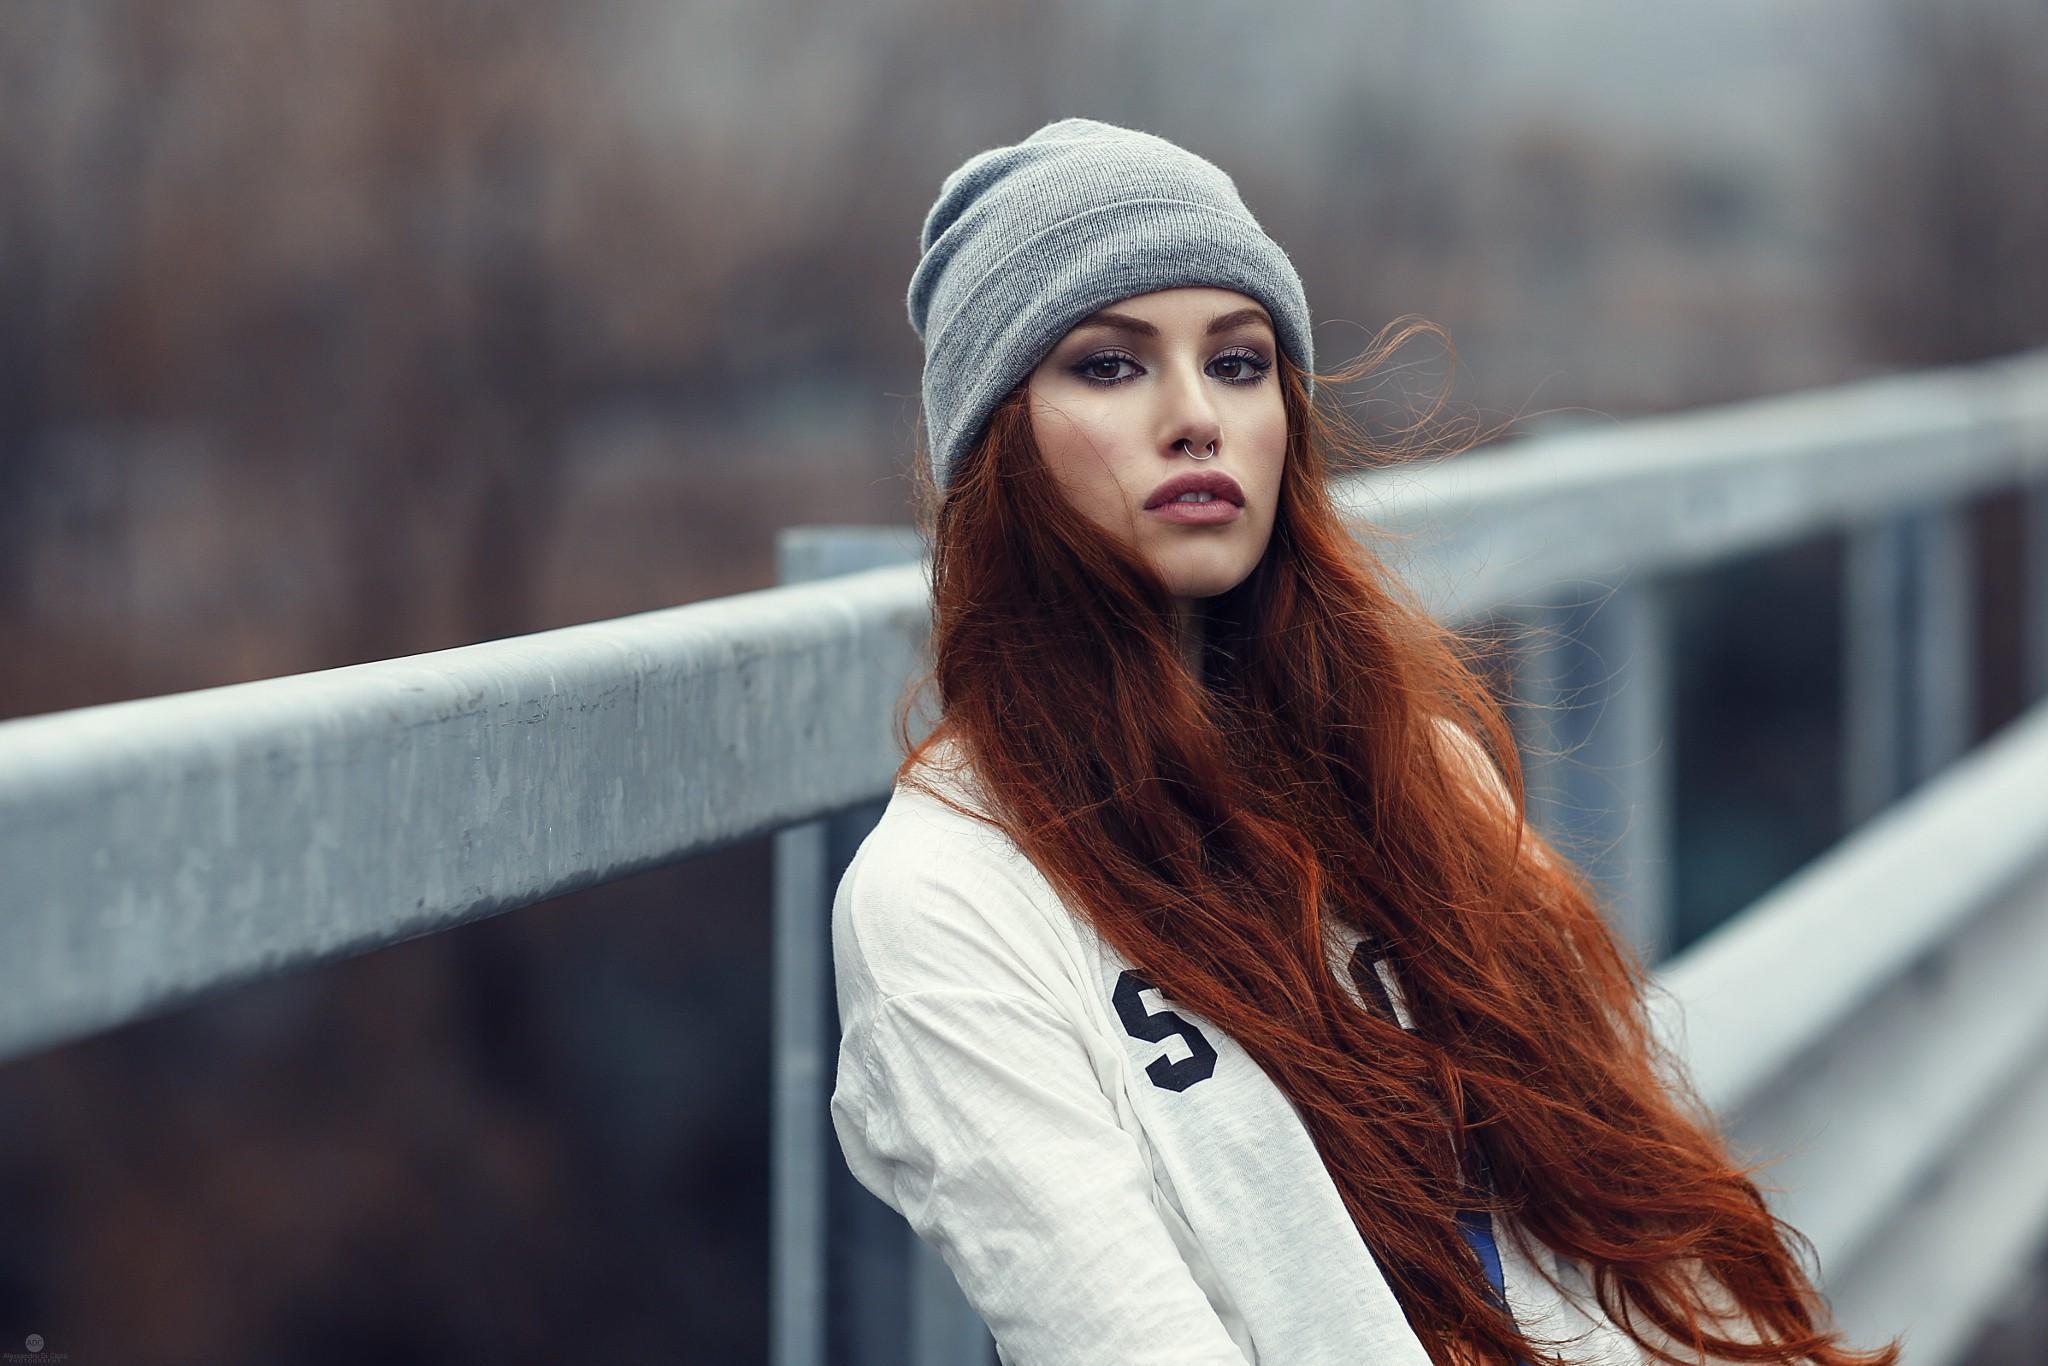 HD wallpaper, Valentina Galassi, Depth Of Field, Face, Portrait, Redhead, Women Outdoors, Alessandro Di Cicco, Pierced Nose, Women, Brown Eyes, Smoky Eyes